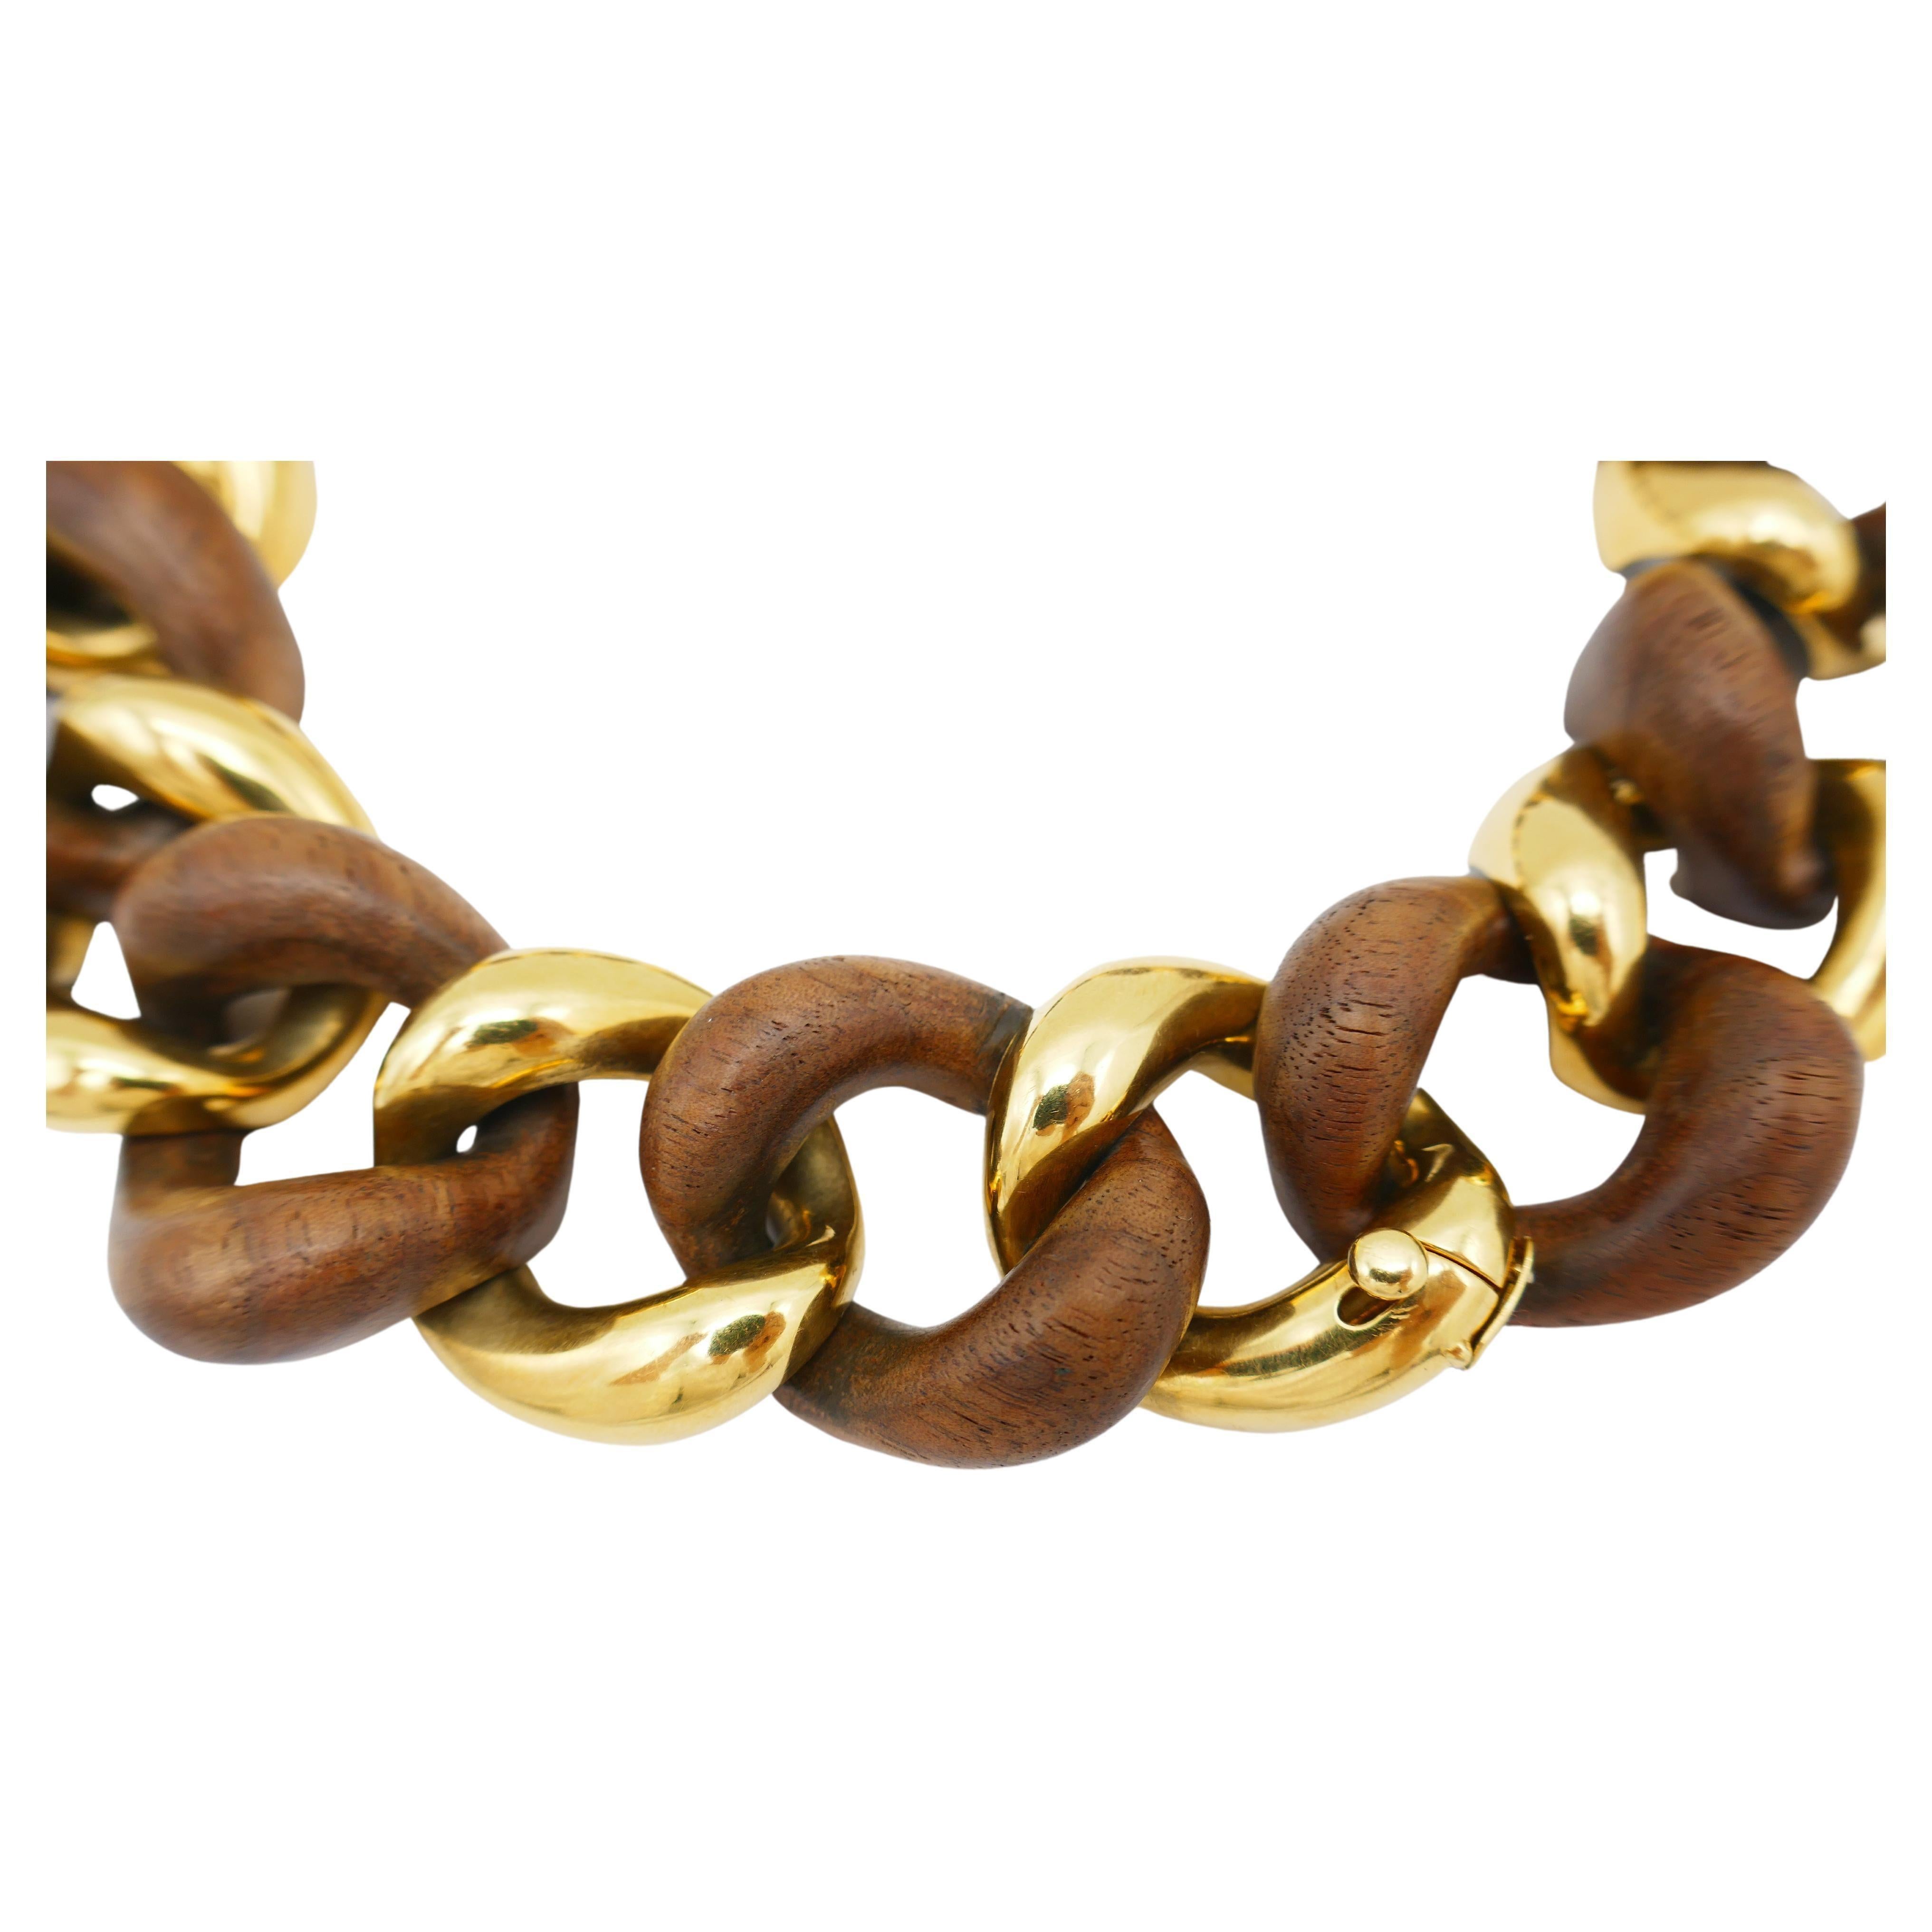 A gorgeous wood and 18k gold Seaman Schepps set comprises of a curb link necklace that separates into two bracelets. 
Stamped with Seaman Schepps maker's marks and a hallmark for 18k gold. 
Measurements: the necklace length is 16